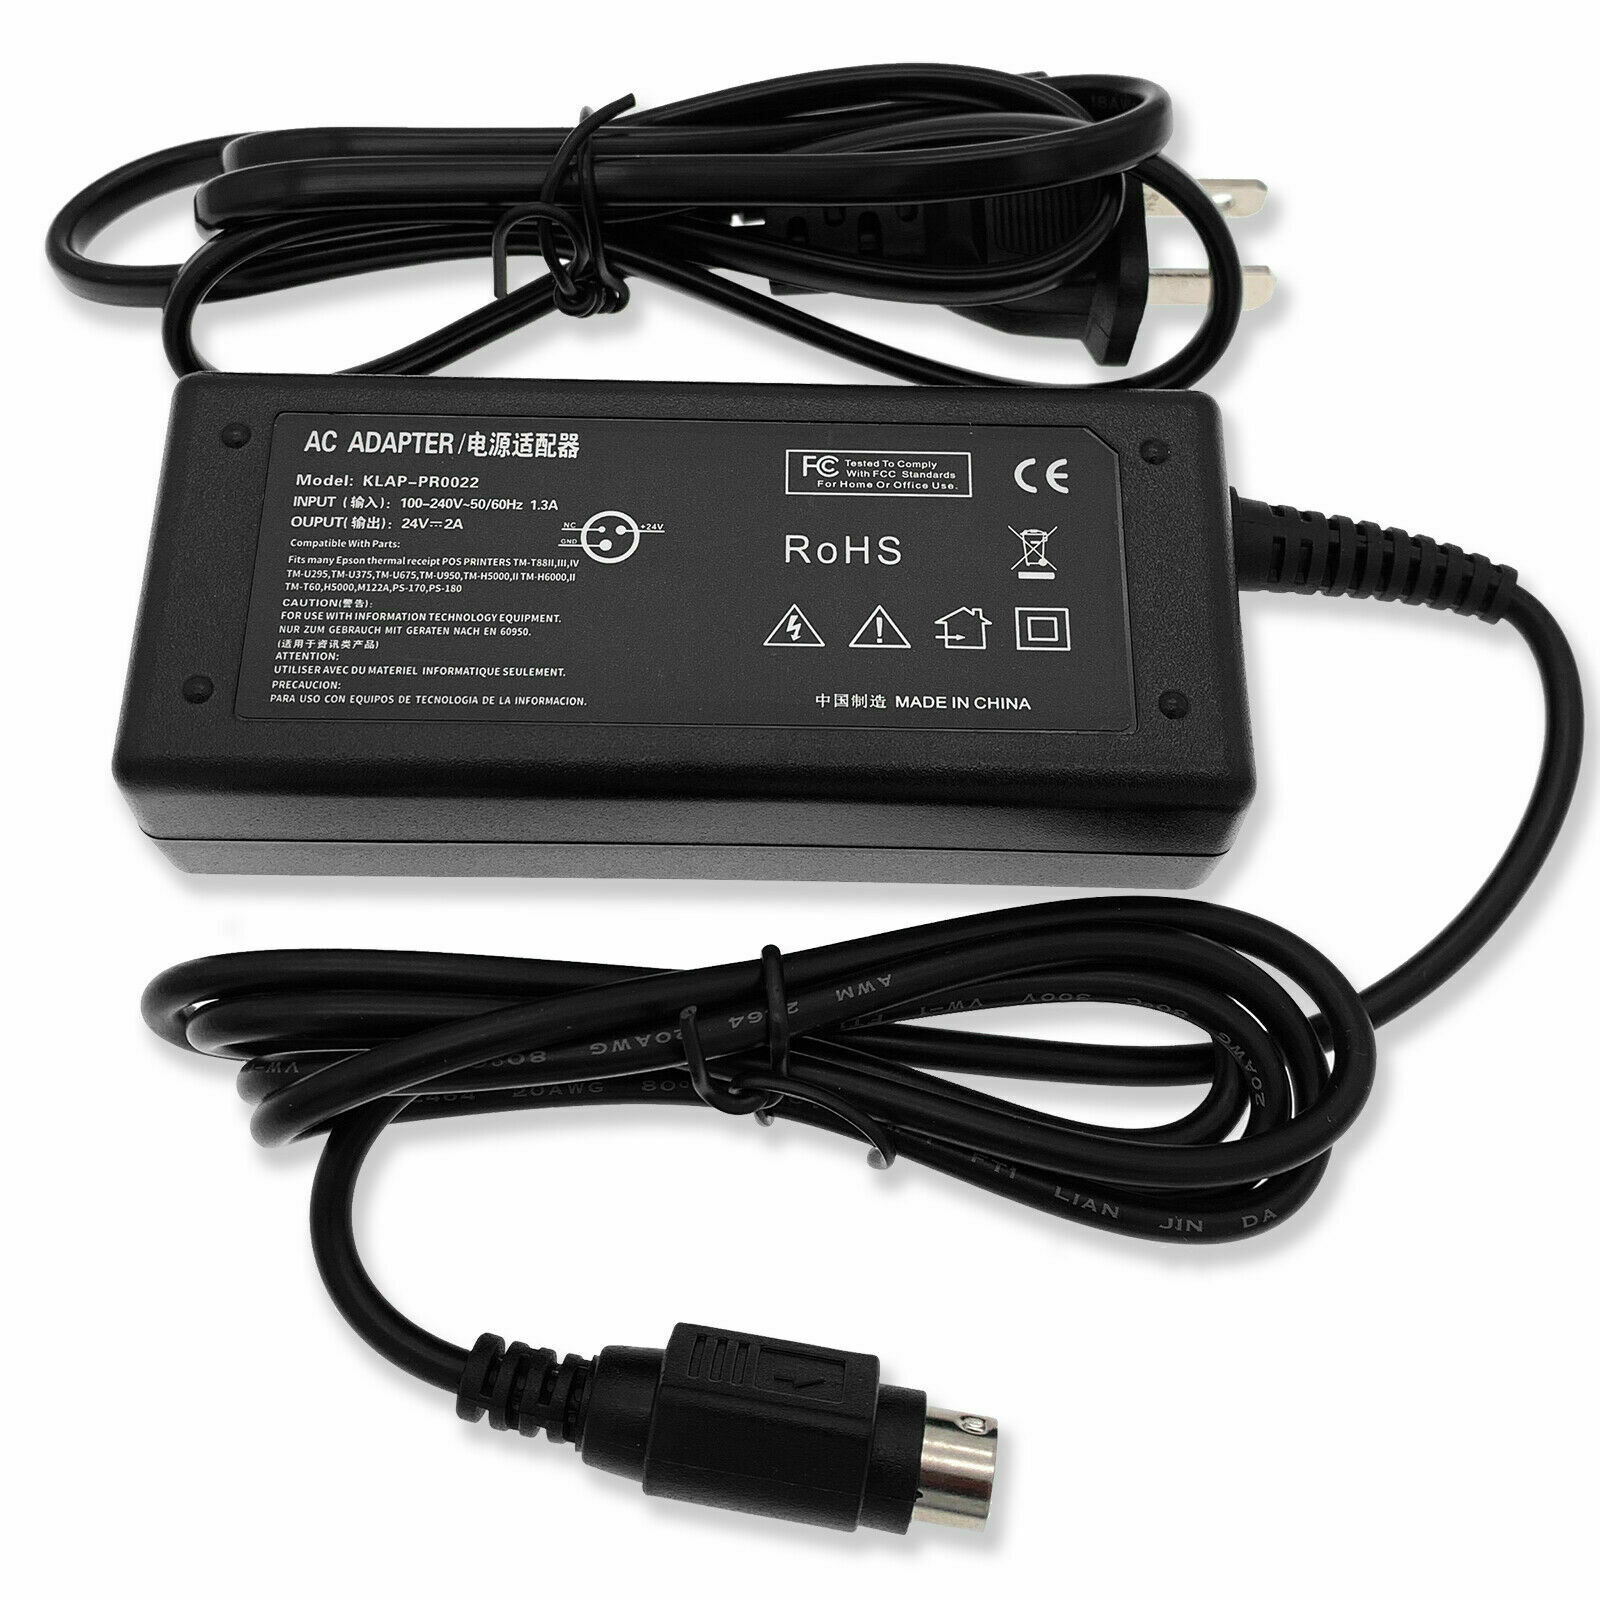 AC Power Adapter Cord For Epson TM-290II TM-H6000 TM-T70 C825343 Receipt Printer Compatible Brand: Epson, For Epson Ty